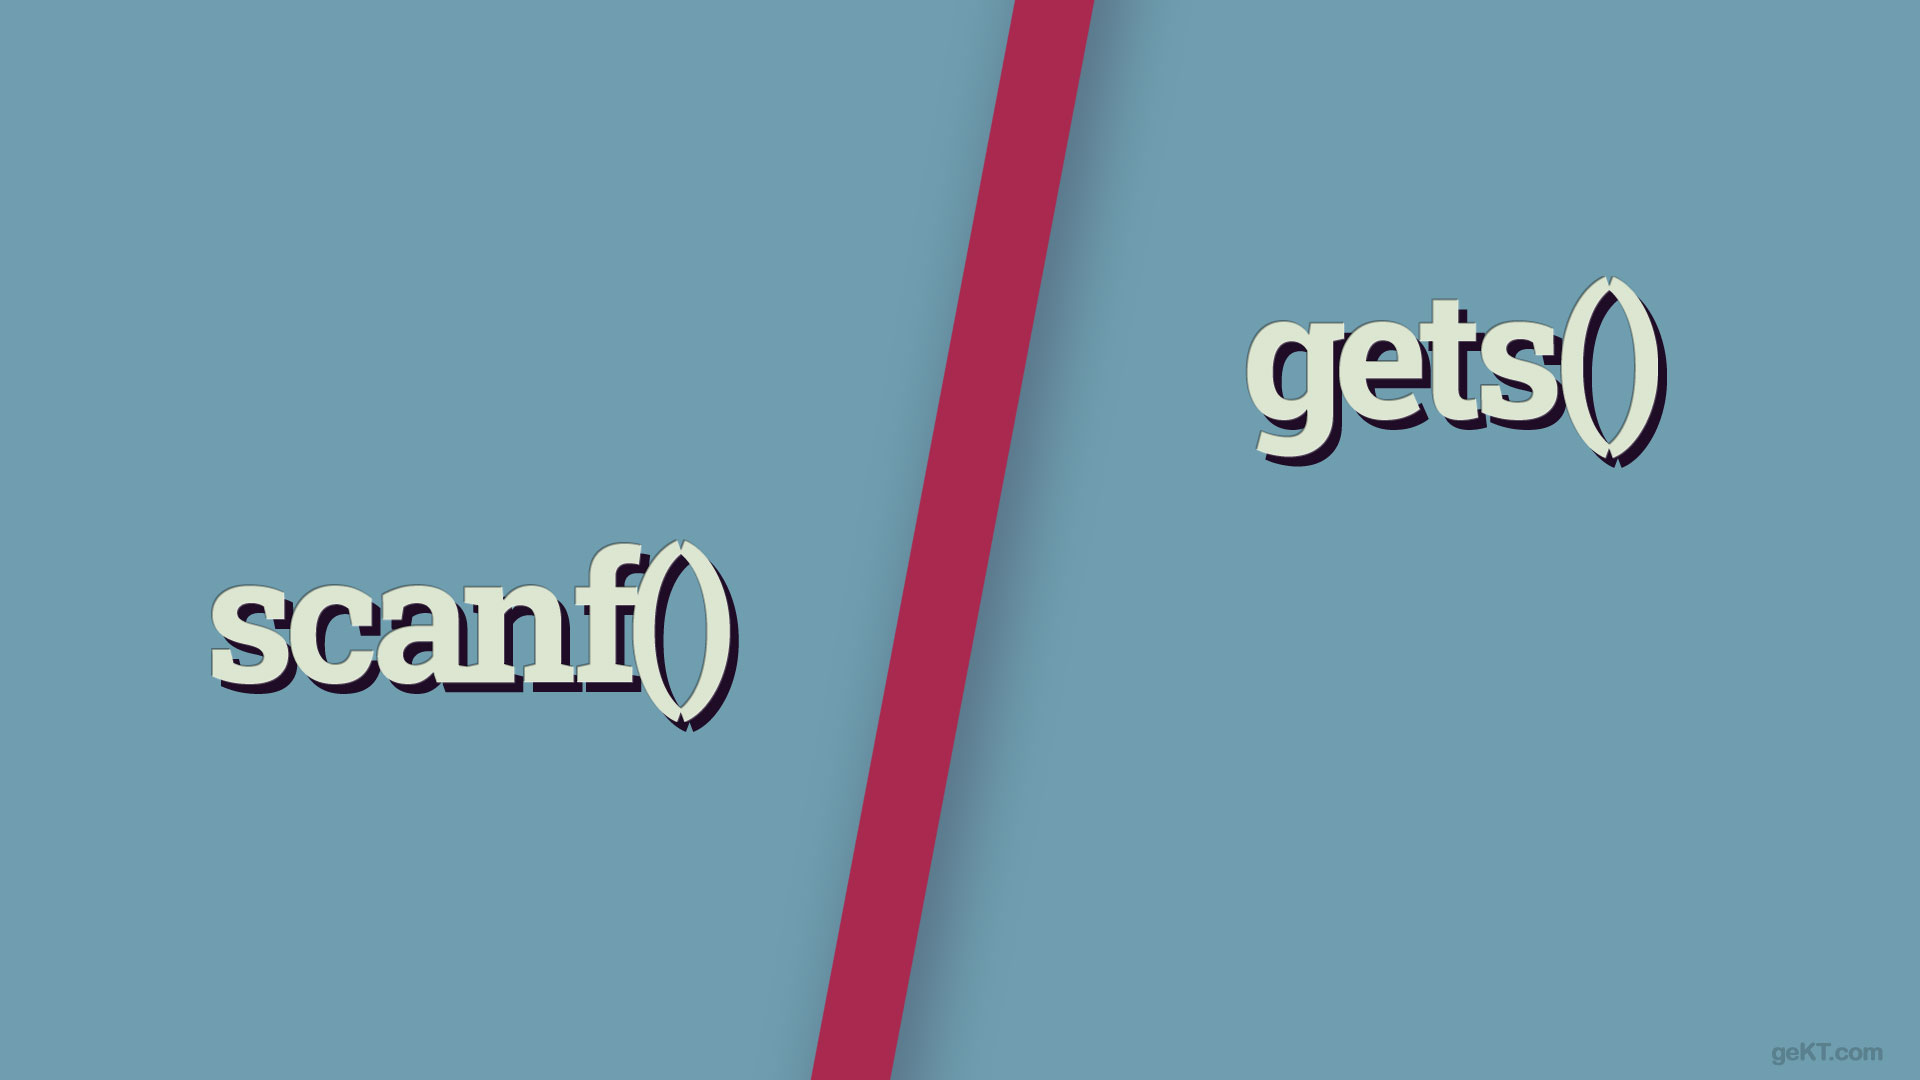 scanf() vs gets() functions in c-language